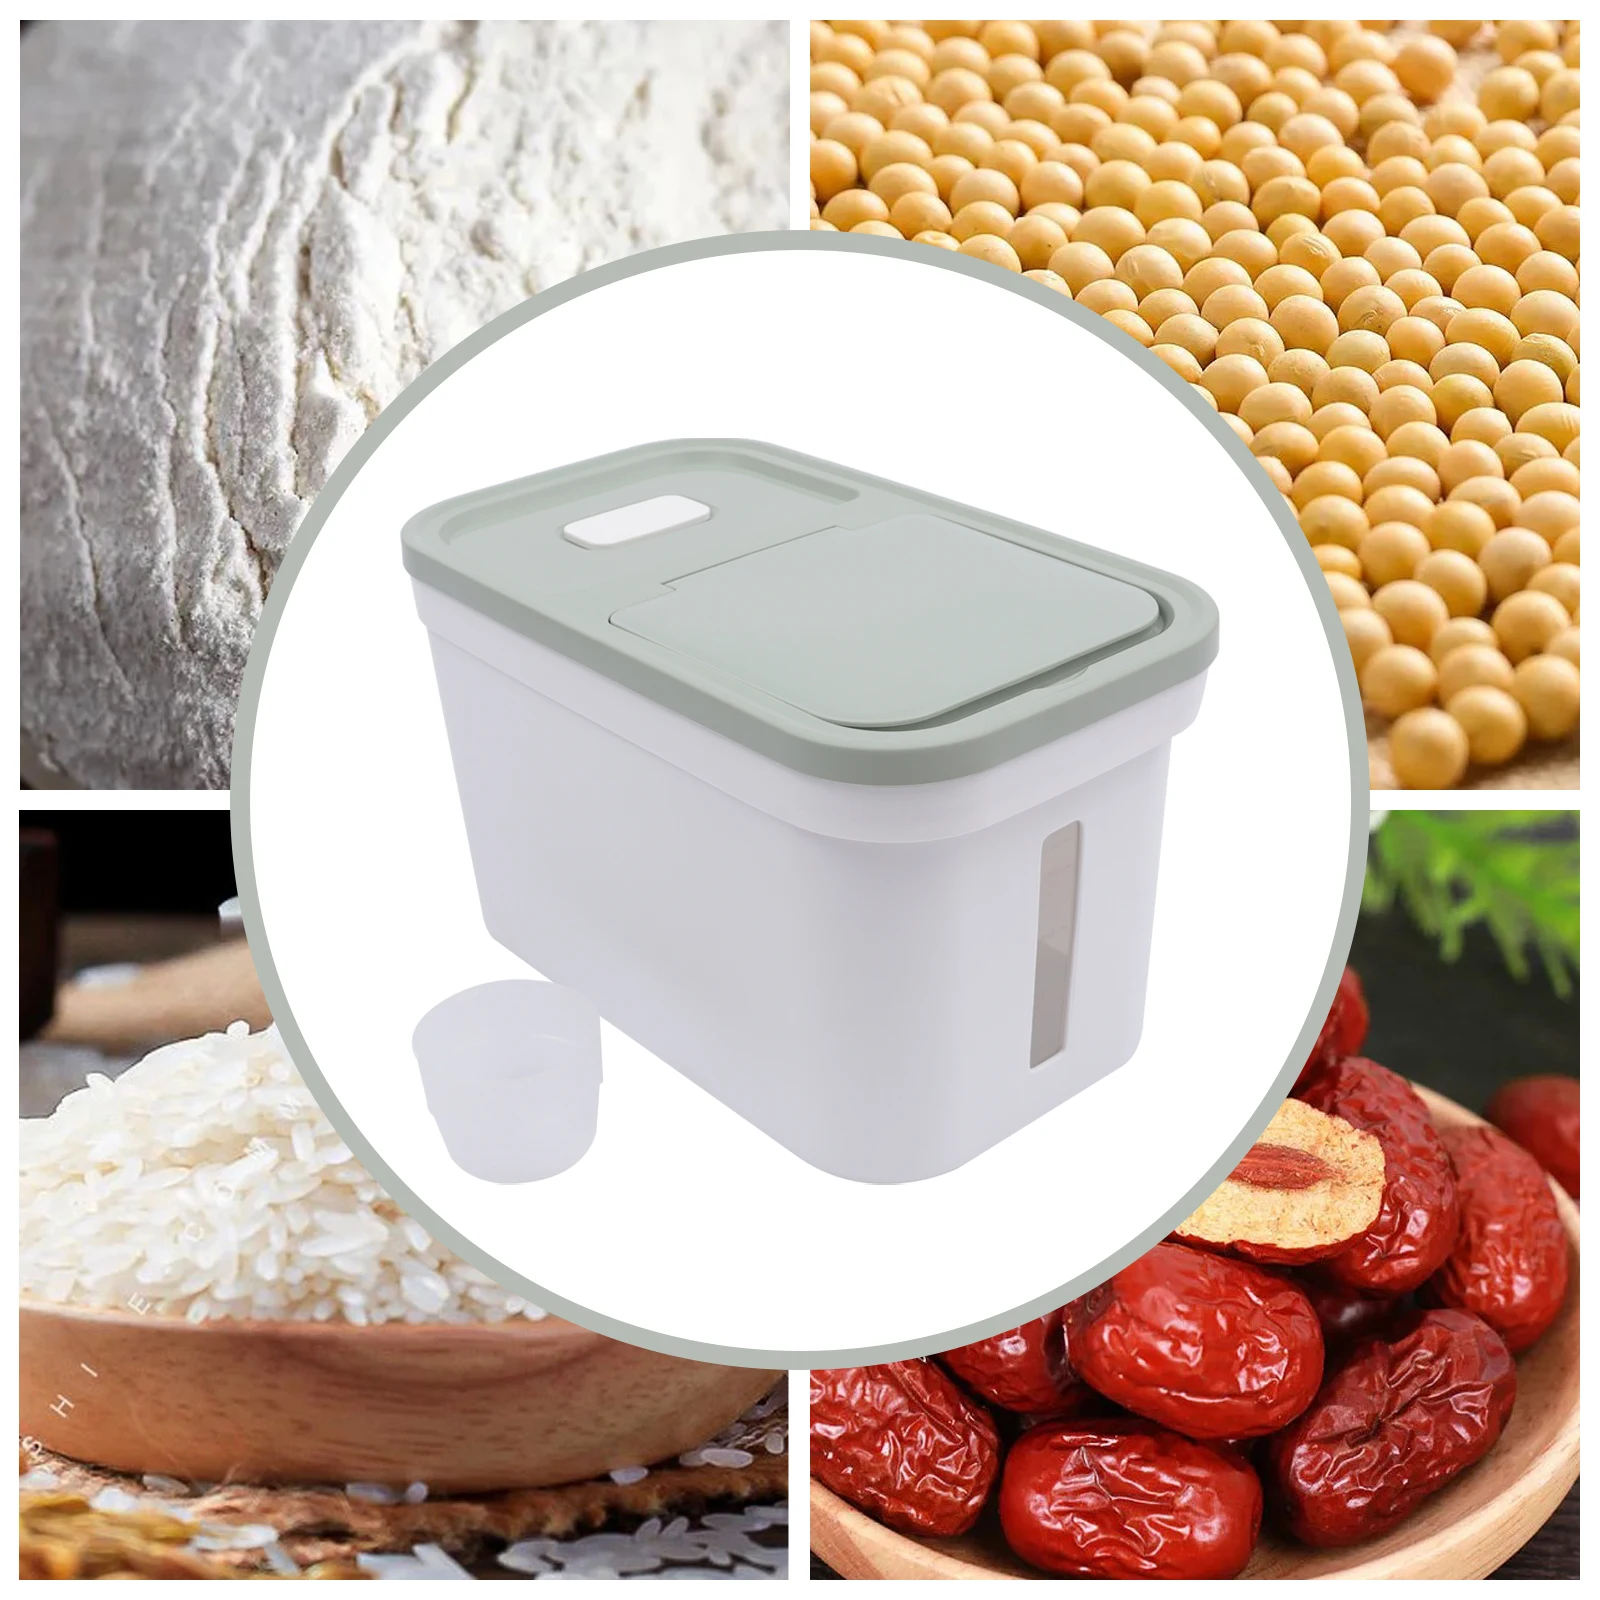 

10kg Large Rice Container Dry Food Flour Airtight Storage Box Rice Dispenser Grain Bean Bucket Tank Kitchen Organizer with Cup